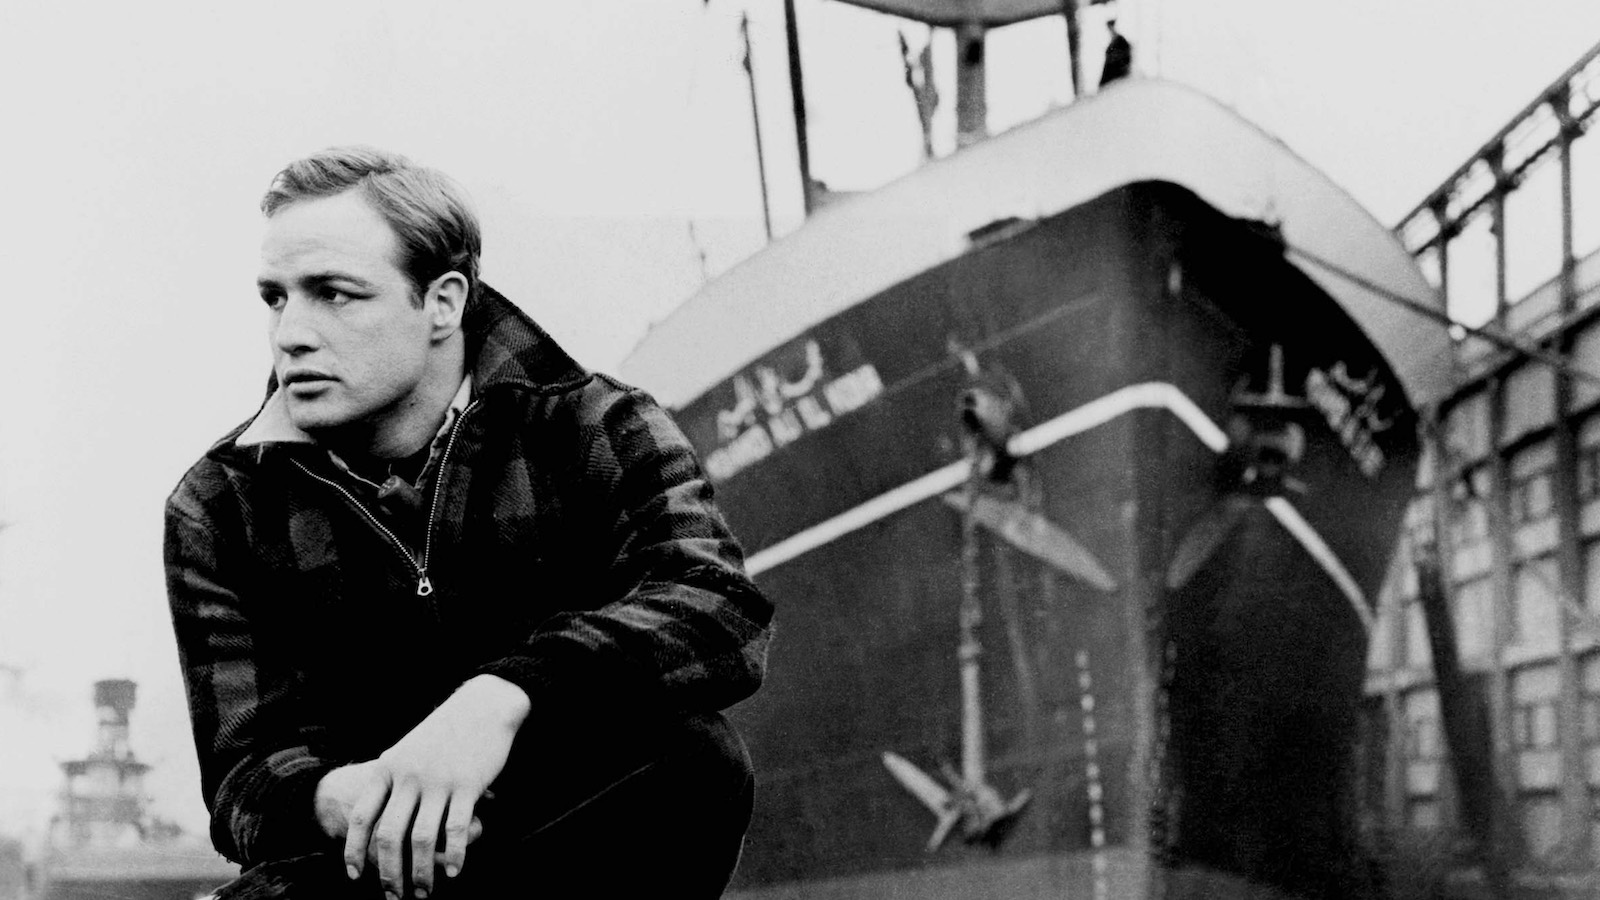 A man crouches by a dockside pier, a large ship behind him in the background